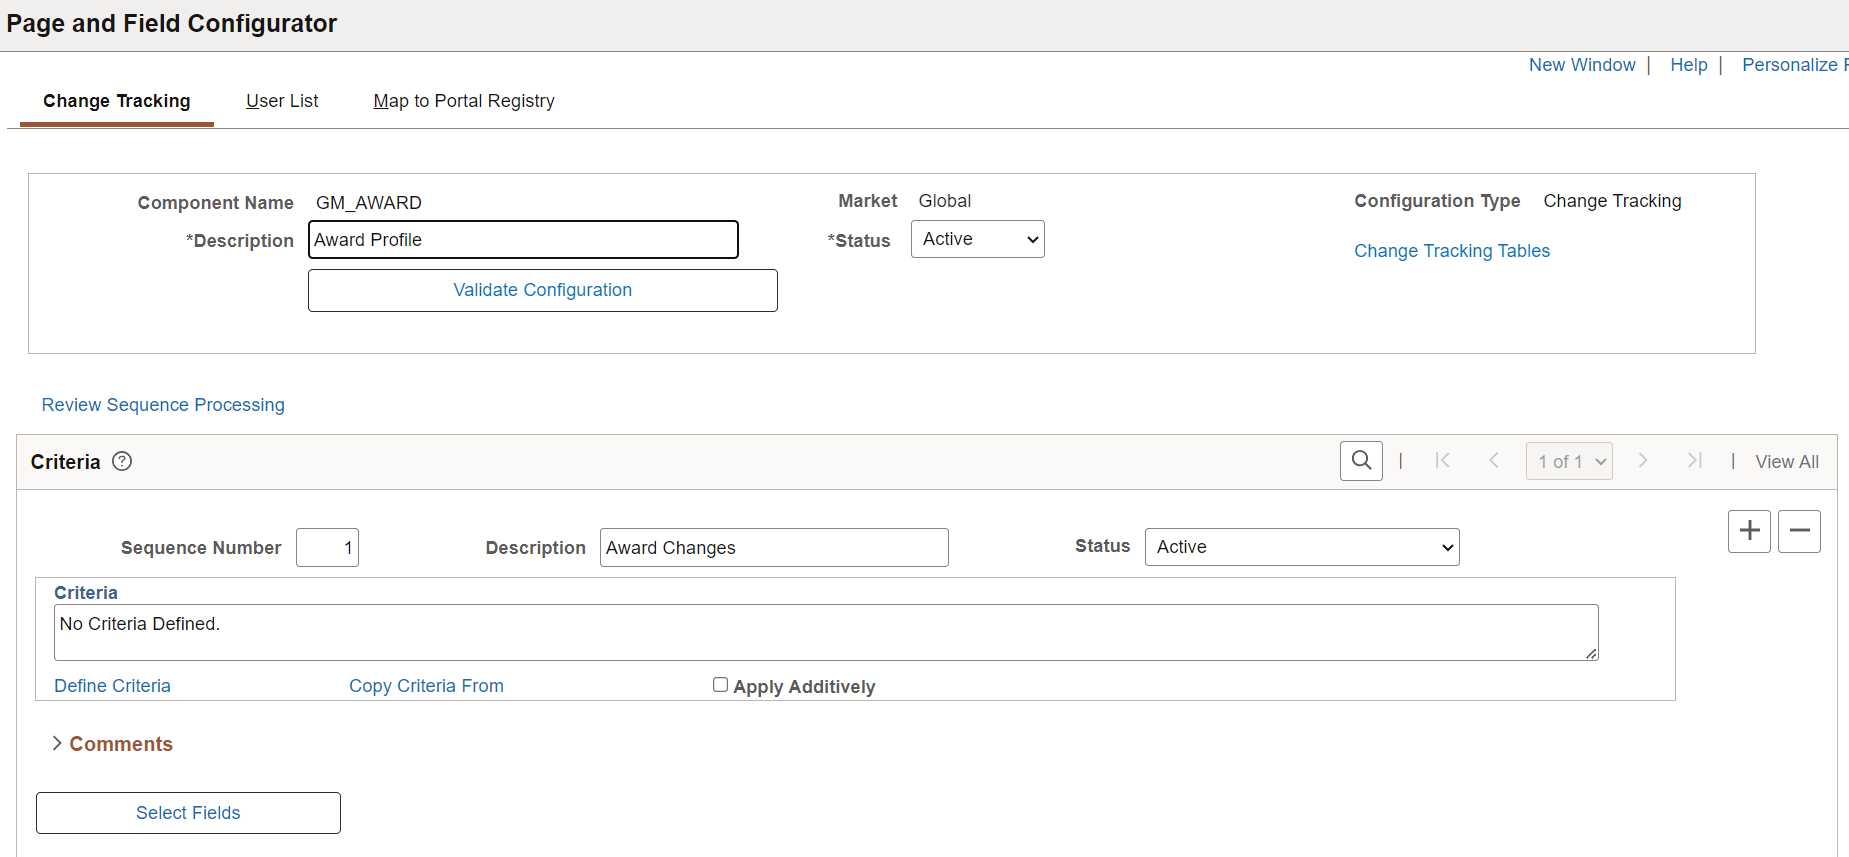 Page and Field Configurator - Change Tracking page (1 of 2)